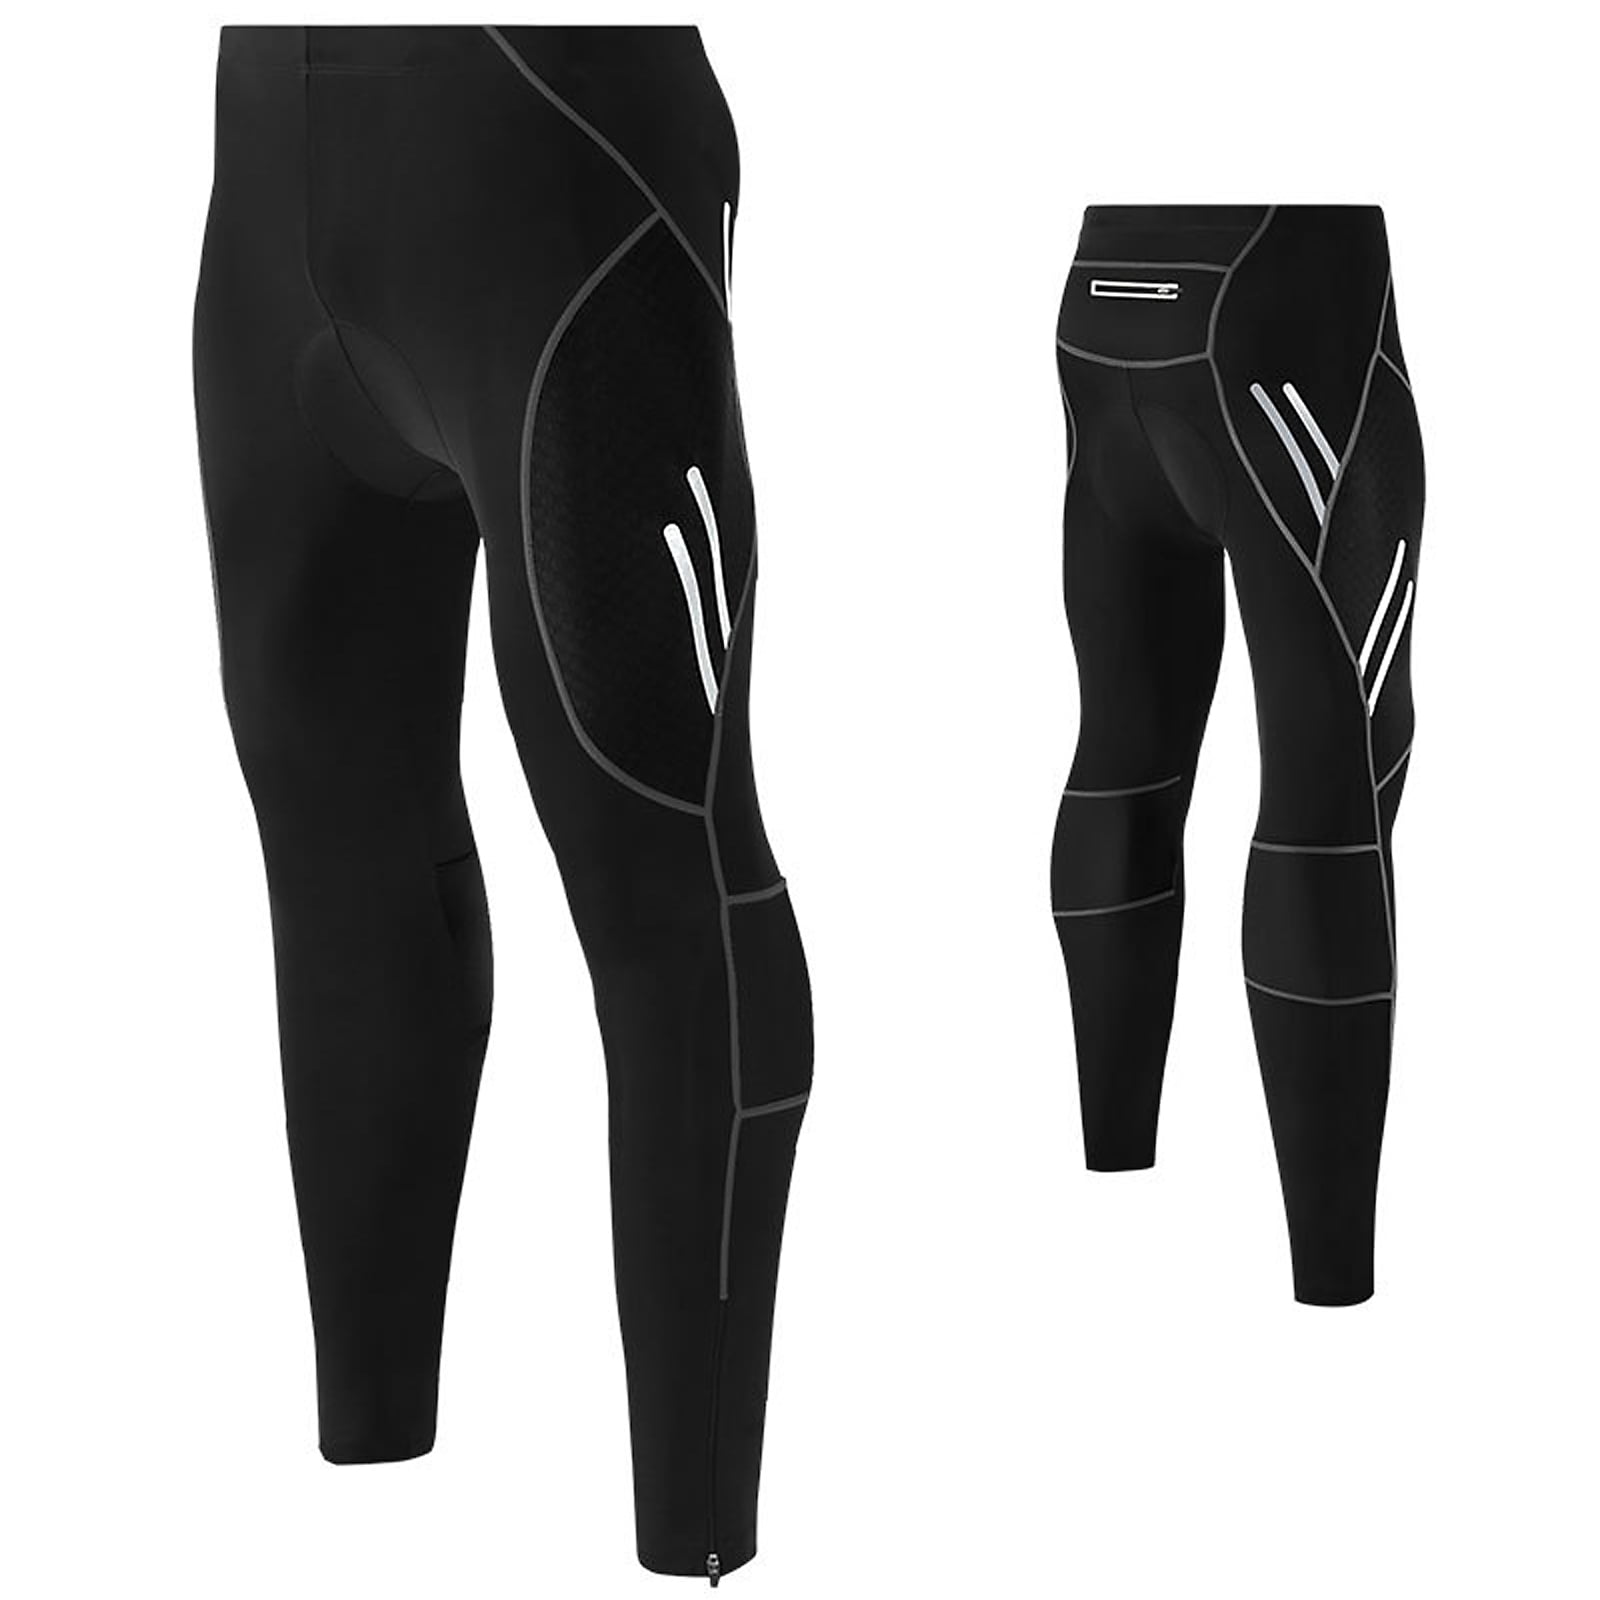 Details about   Men's Cycling Tights Slicone Padded Pants Bicycle Long Trousers Bike Legging 